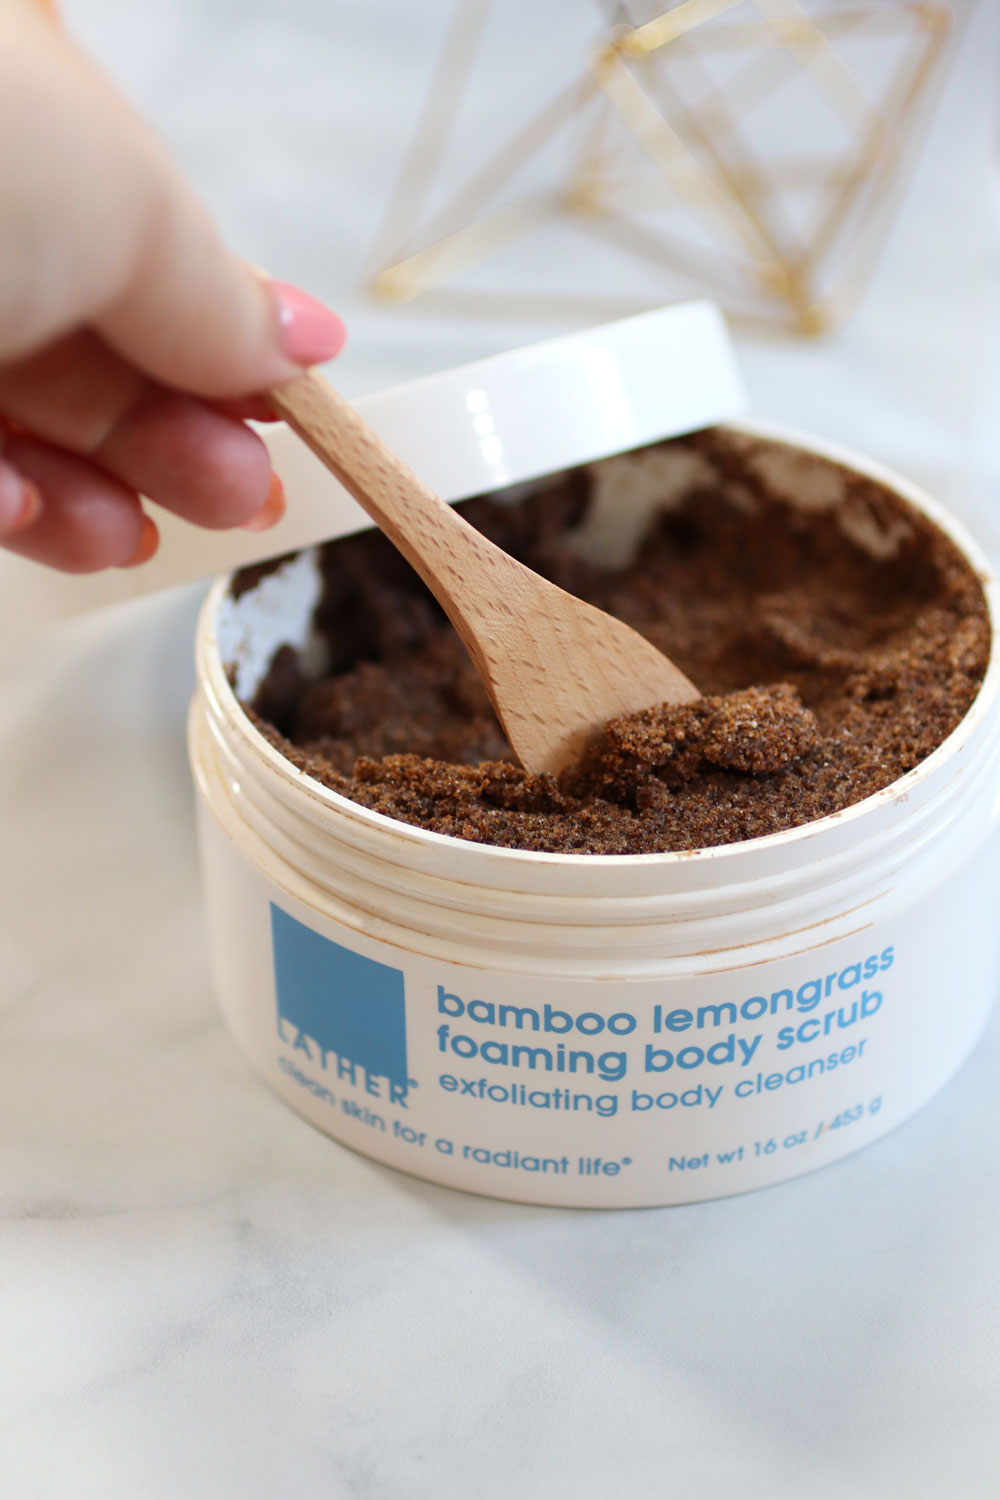 LATHER bamboo lemongrass foaming body scrub leaves no oily residue behind